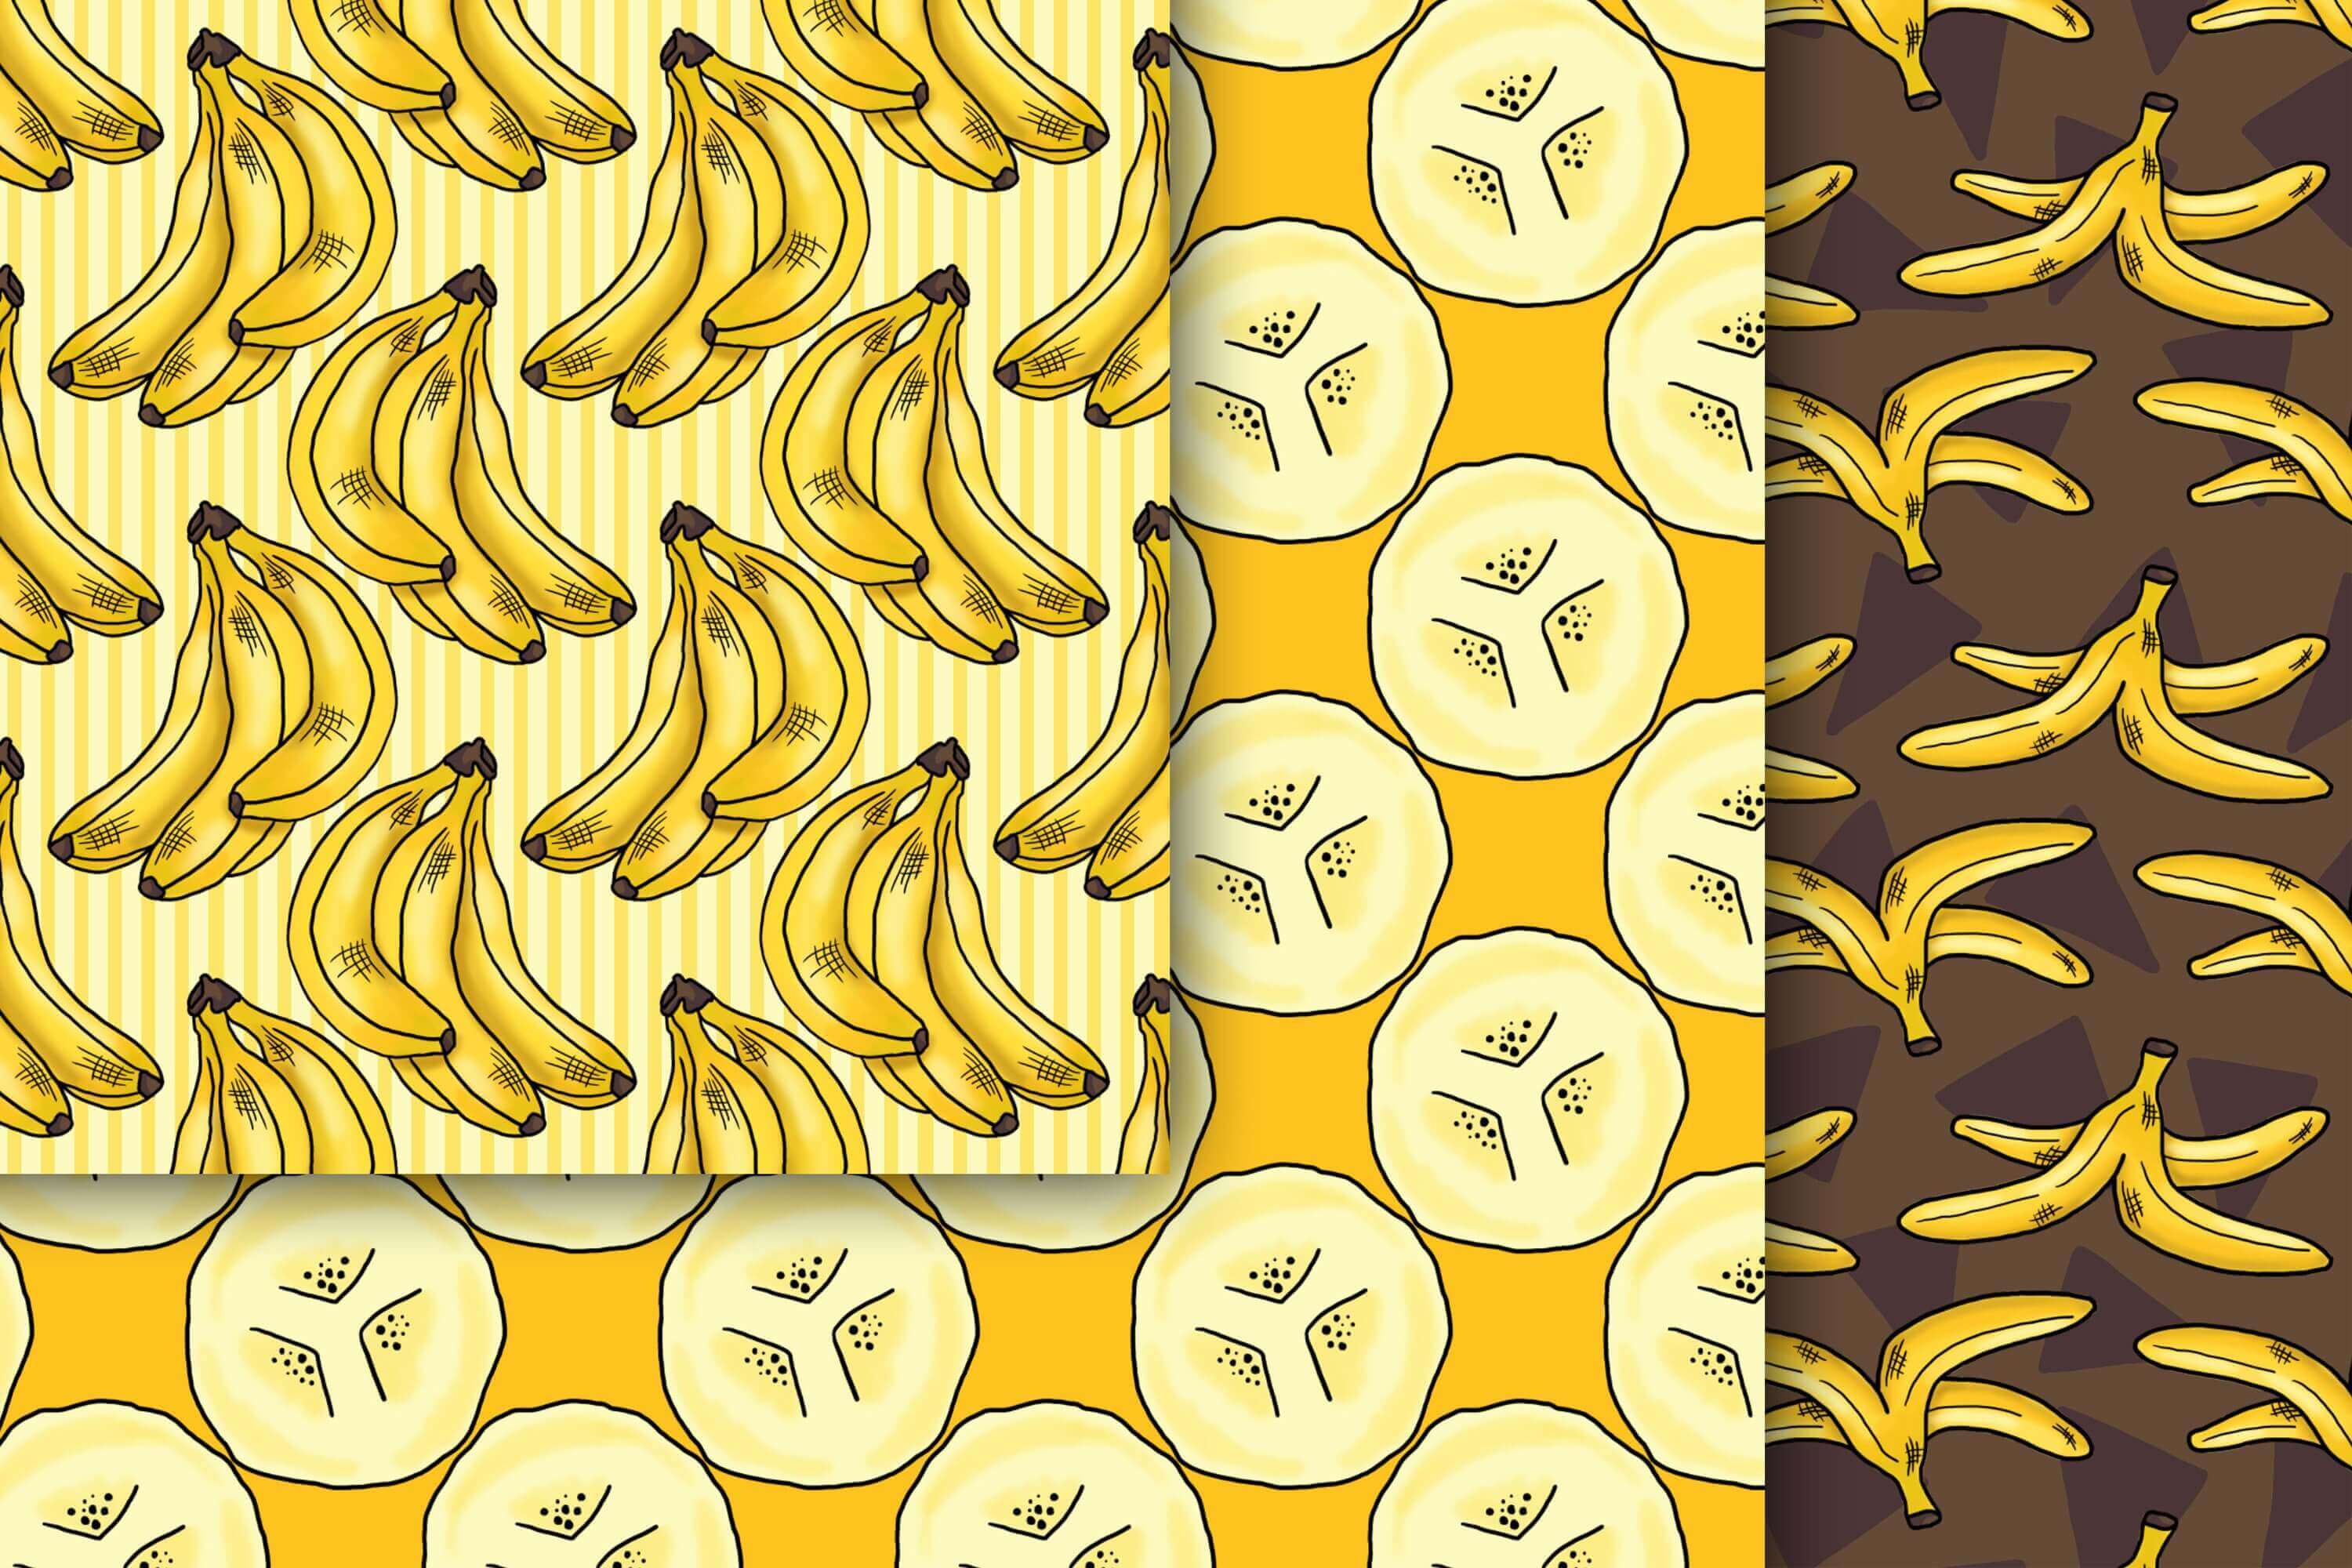 Images of bunches of bananas, banana cores and banana peels on different backgrounds.